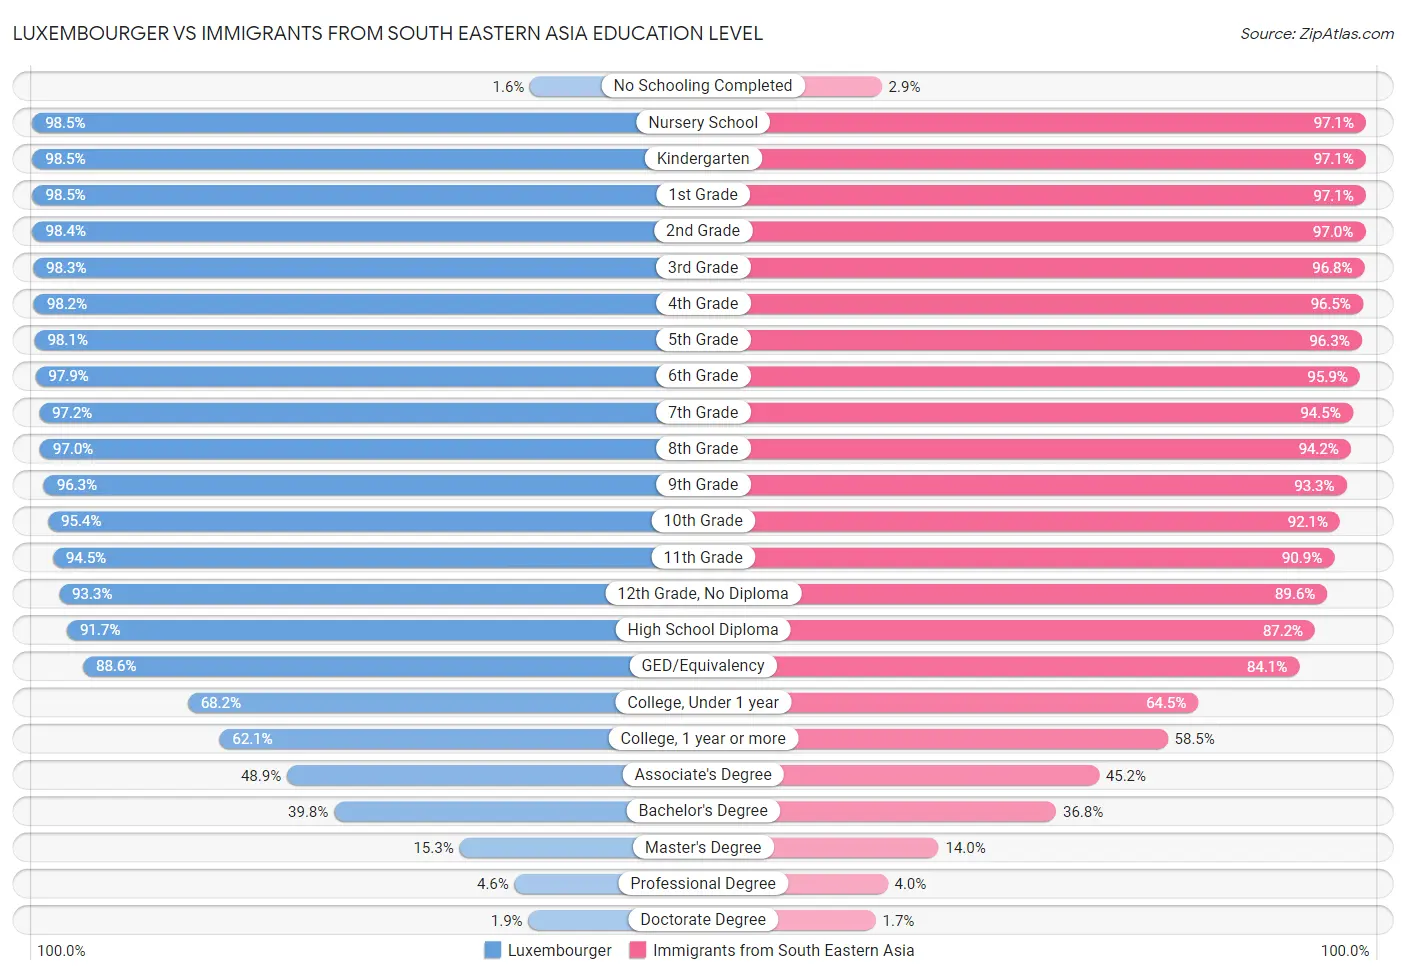 Luxembourger vs Immigrants from South Eastern Asia Education Level